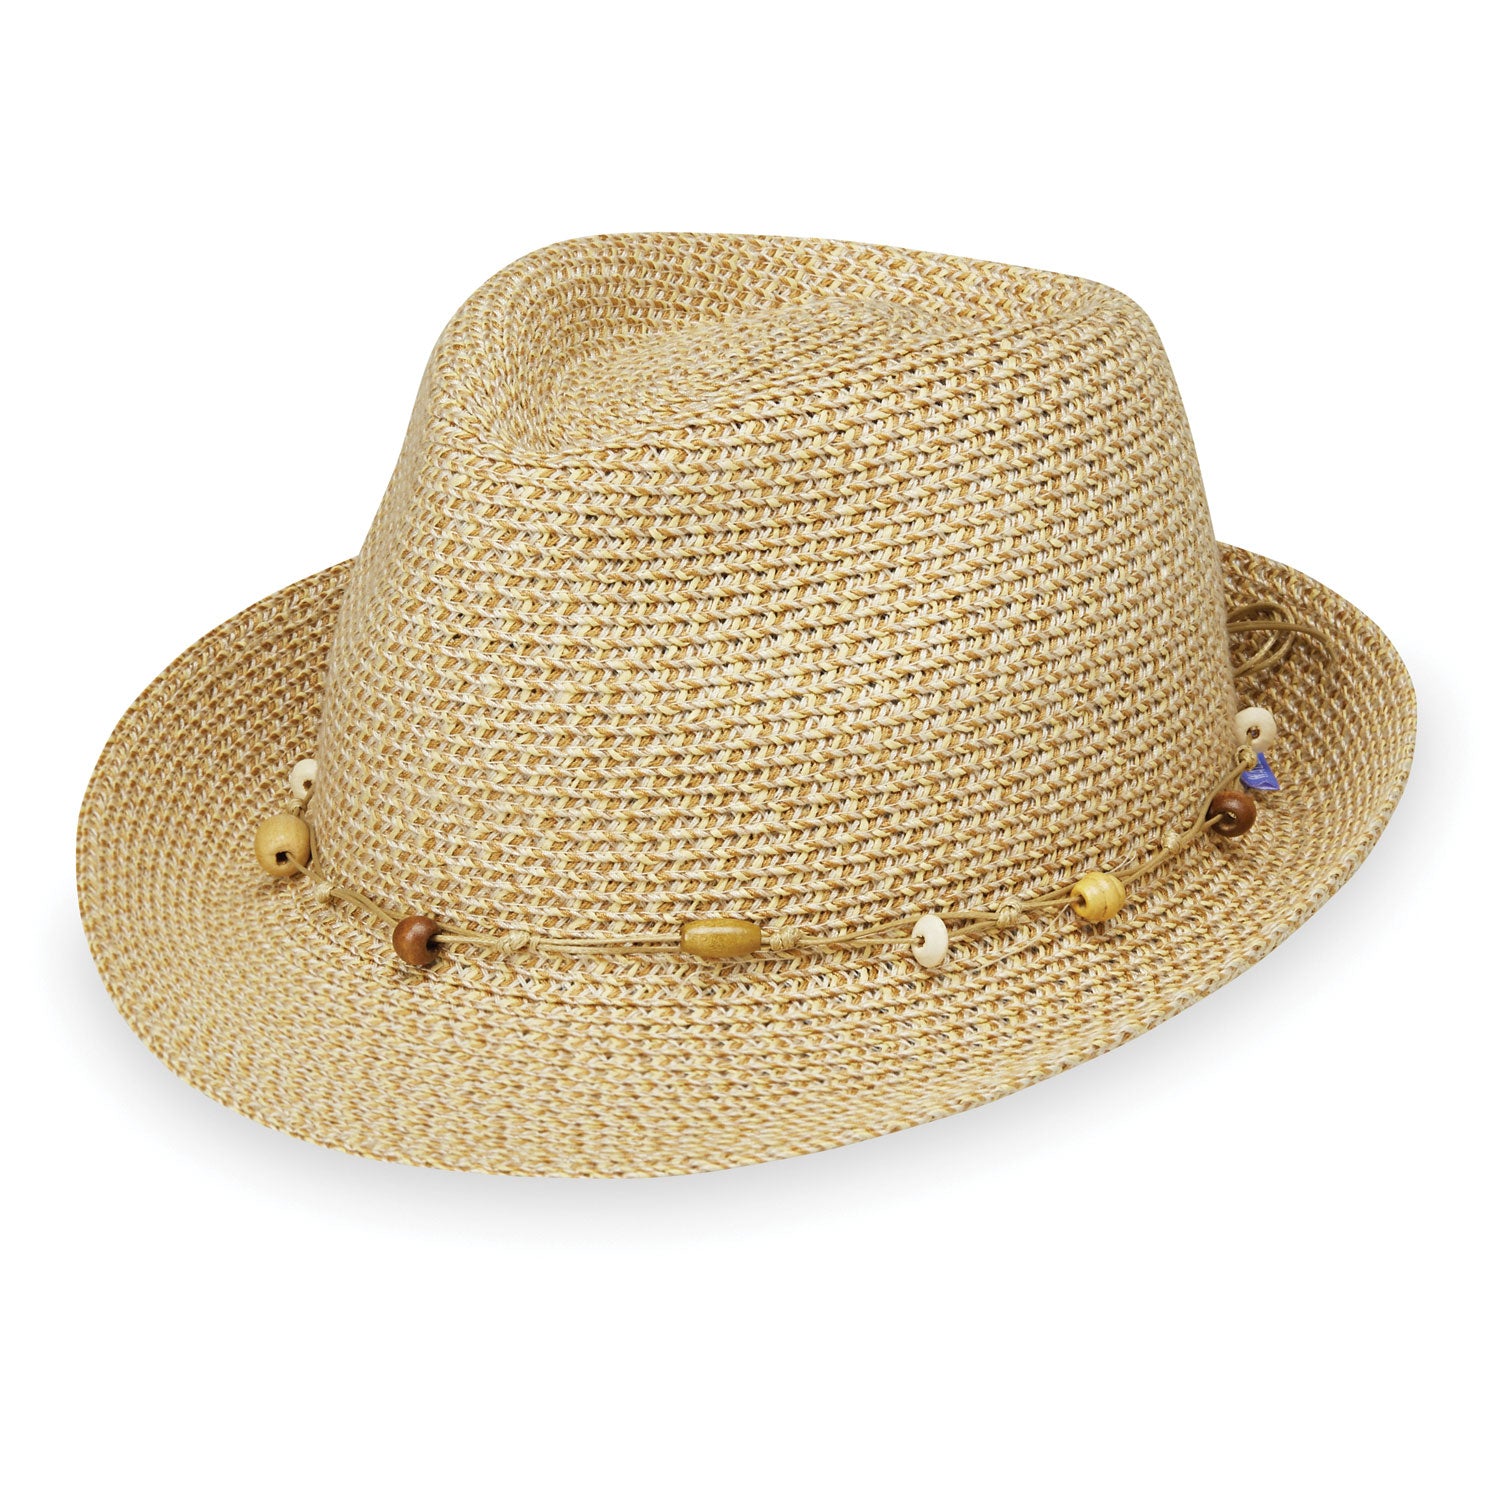 Featuring Women's Packable and Adjustable Fedora Style Waverly Beach Sun Hat from Wallaroo